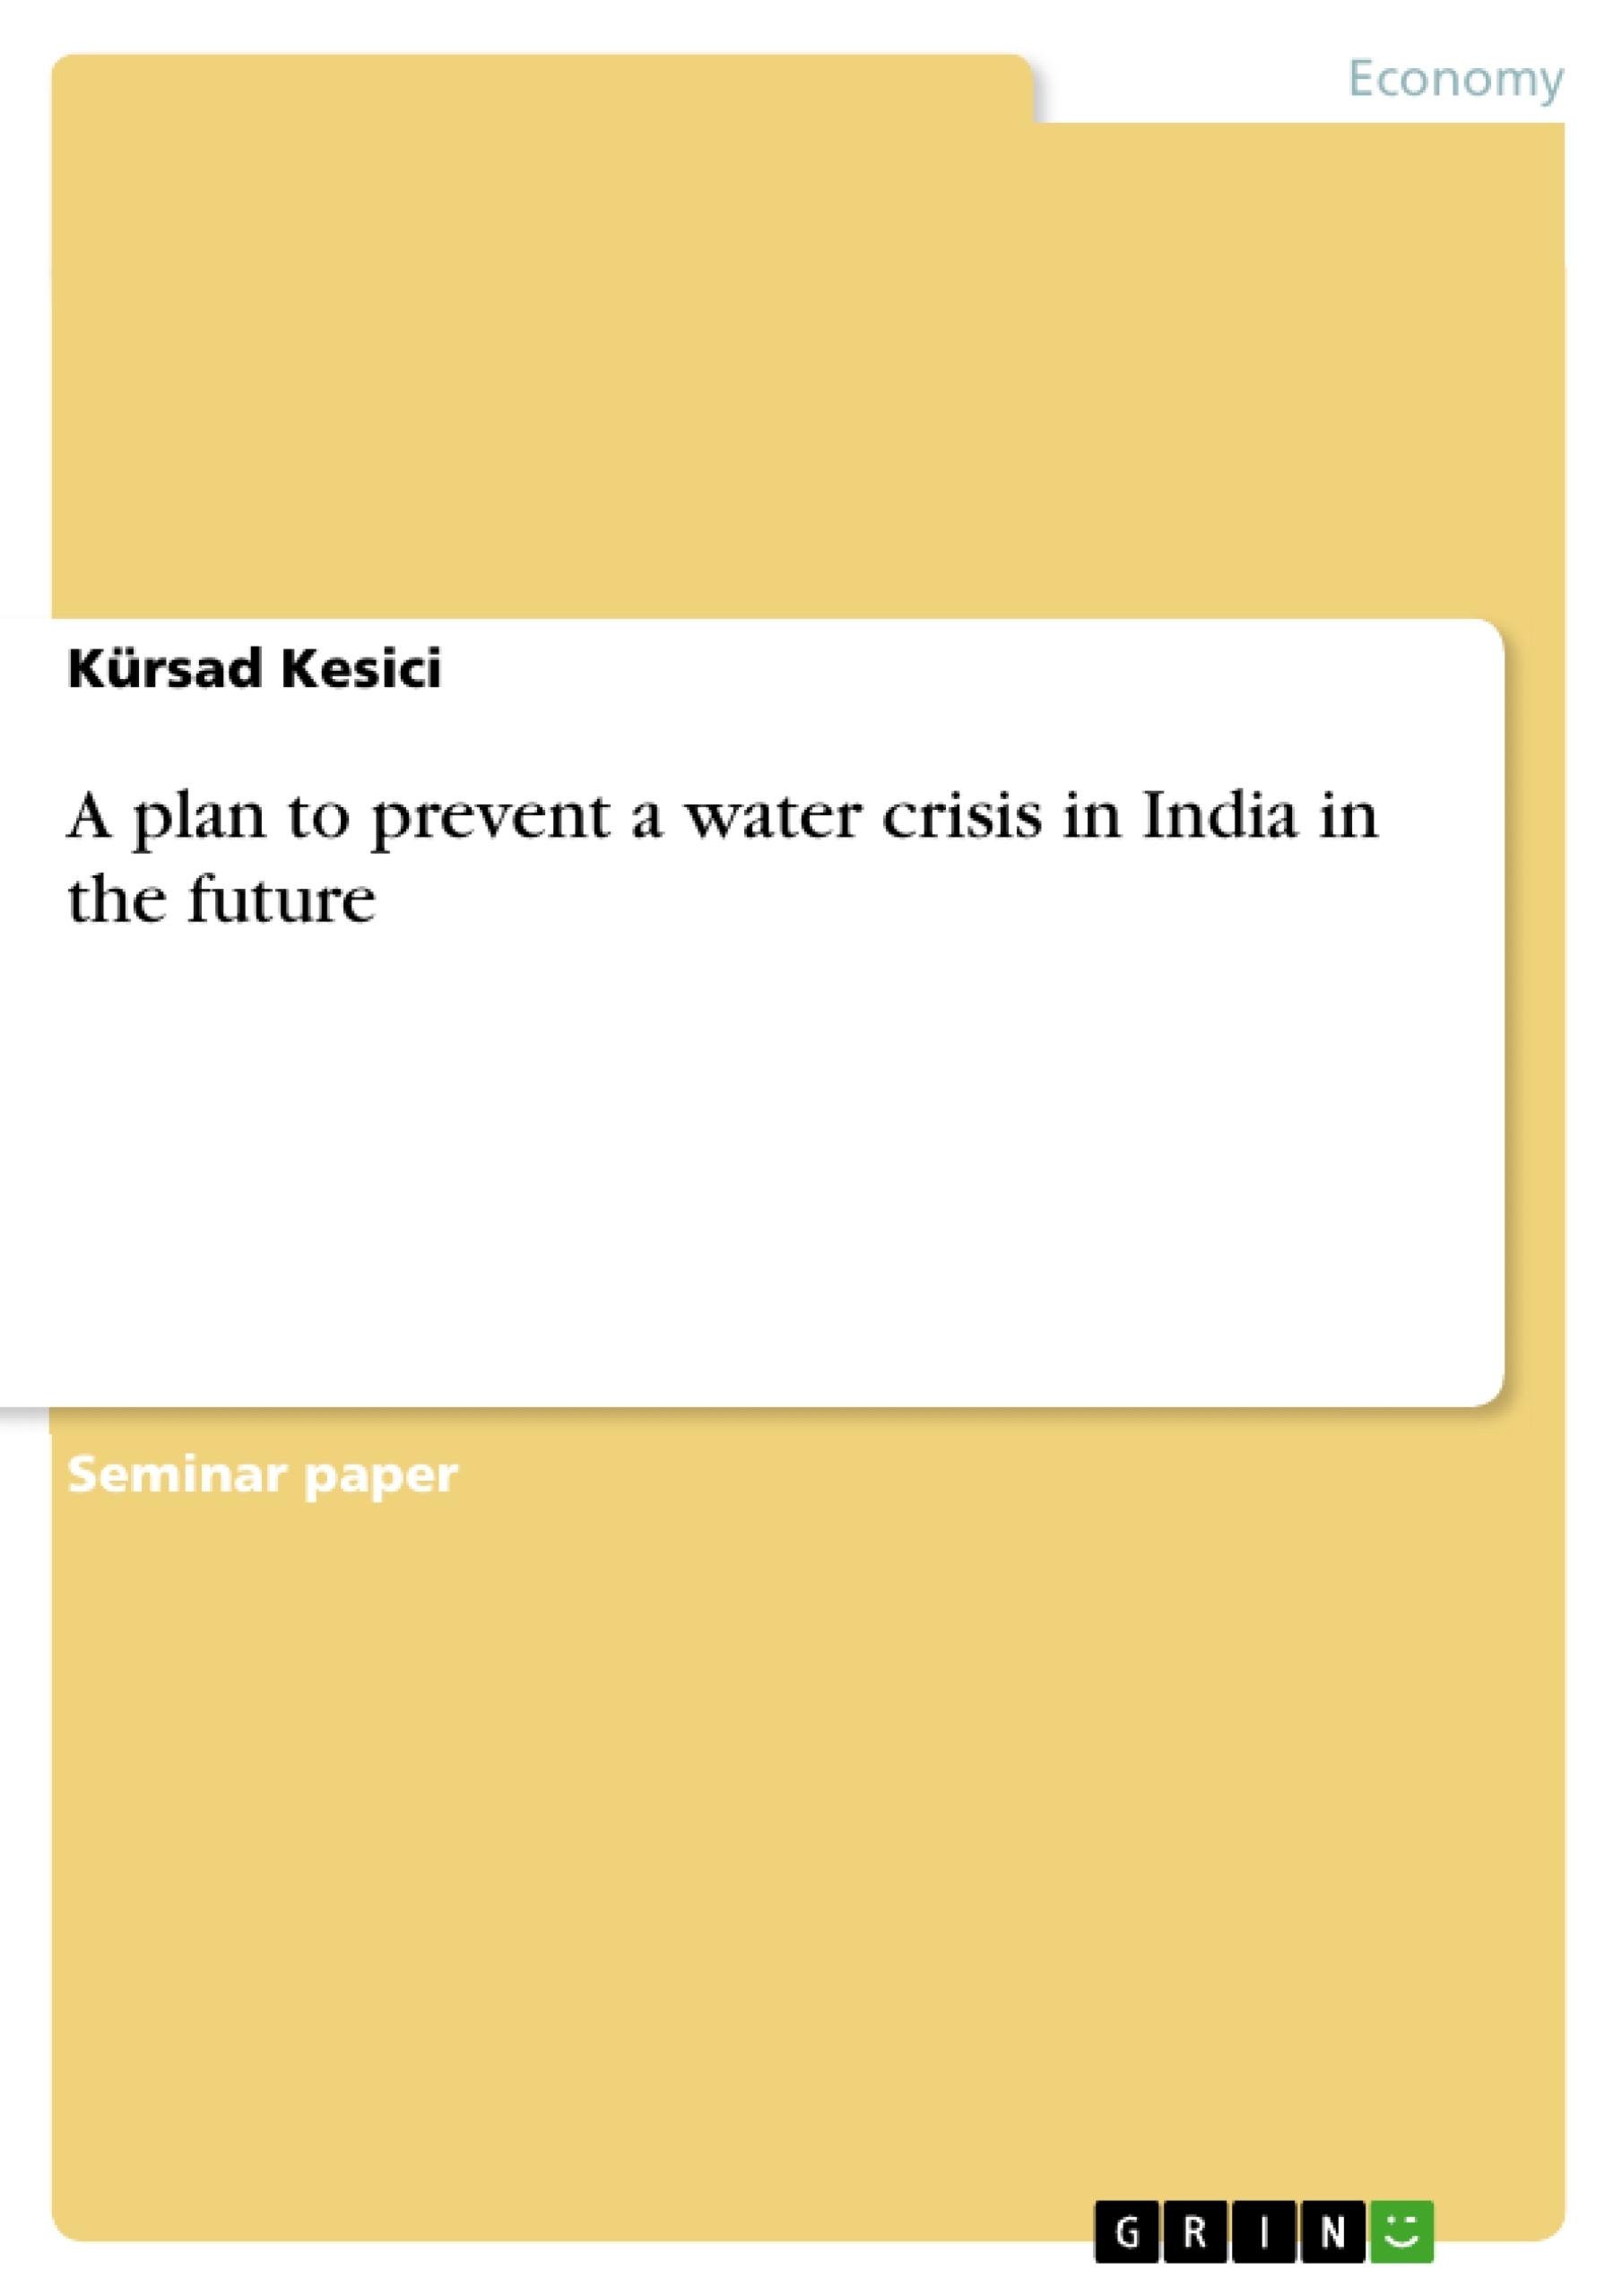 Title: A plan to prevent a water crisis in India in the future